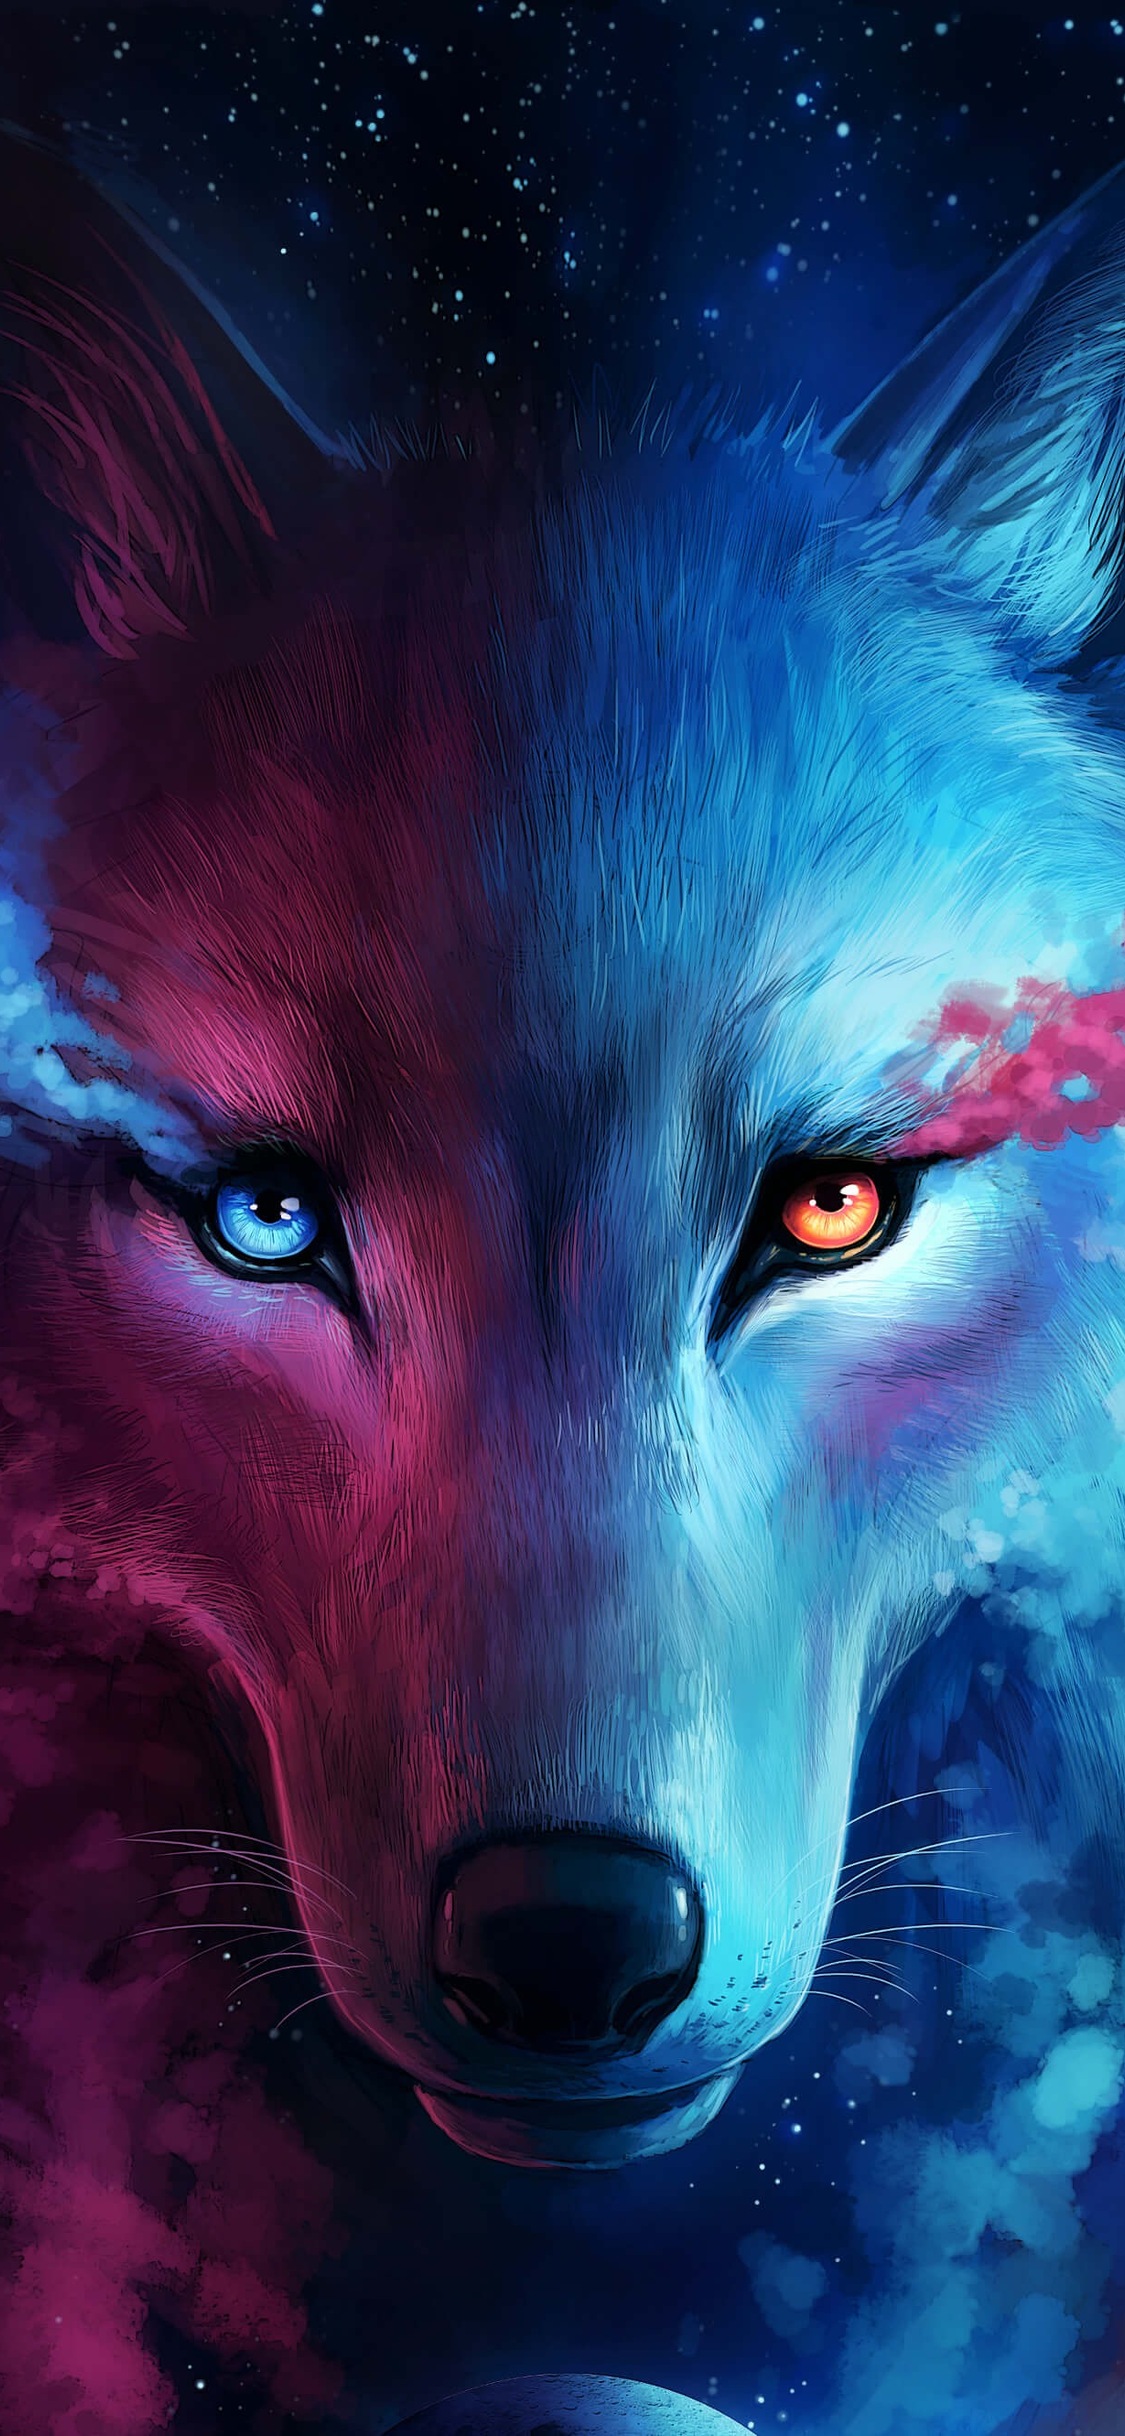 The Galaxy Wolf iPhone XS, iPhone iPhone X HD 4k Wallpaper, Image, Background, Photo and Picture